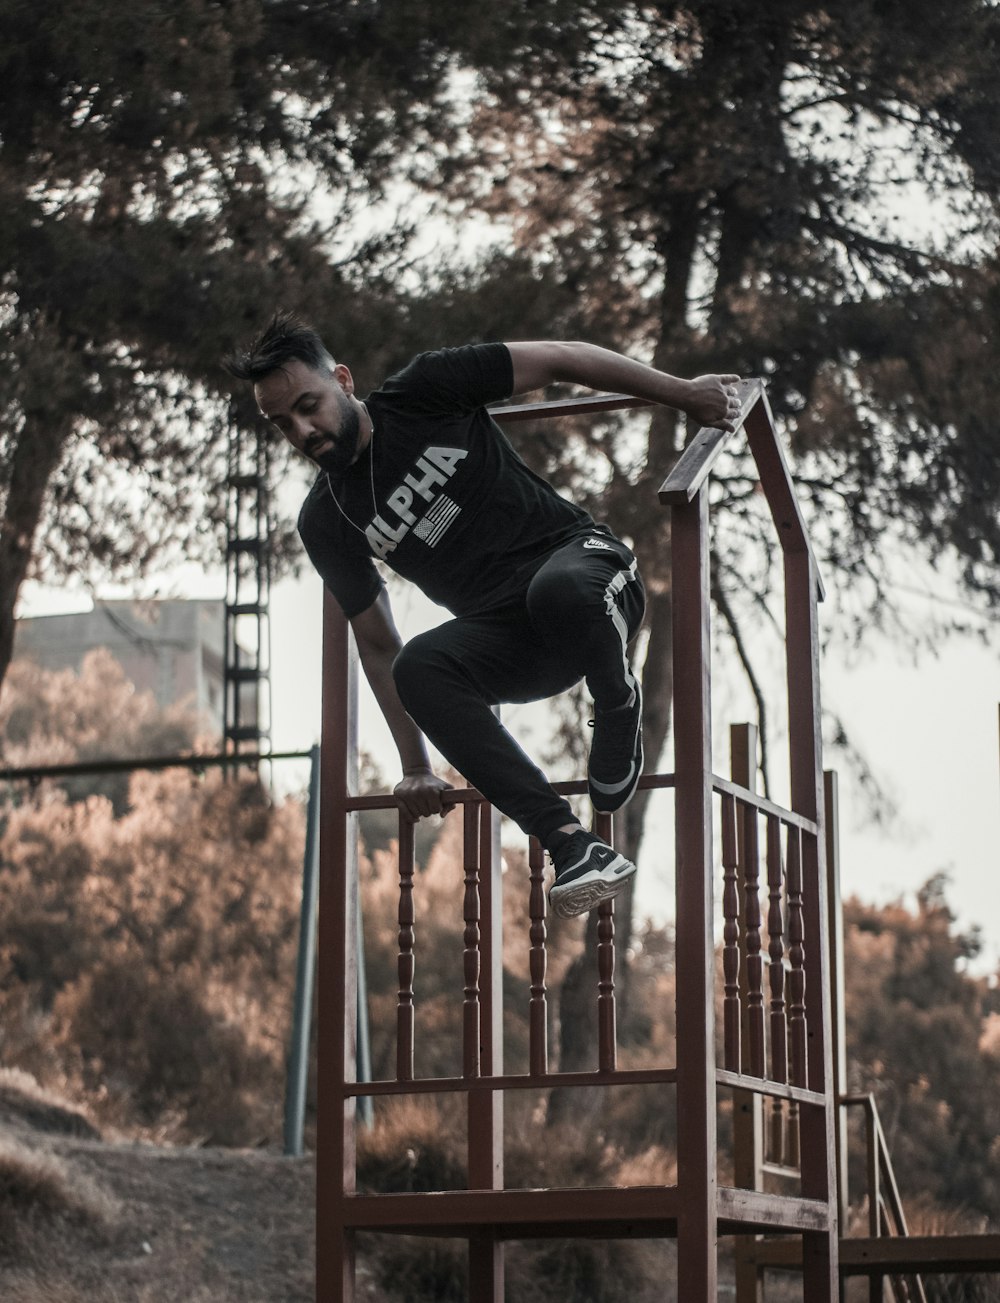 man in black t-shirt and black pants jumping on red metal railings